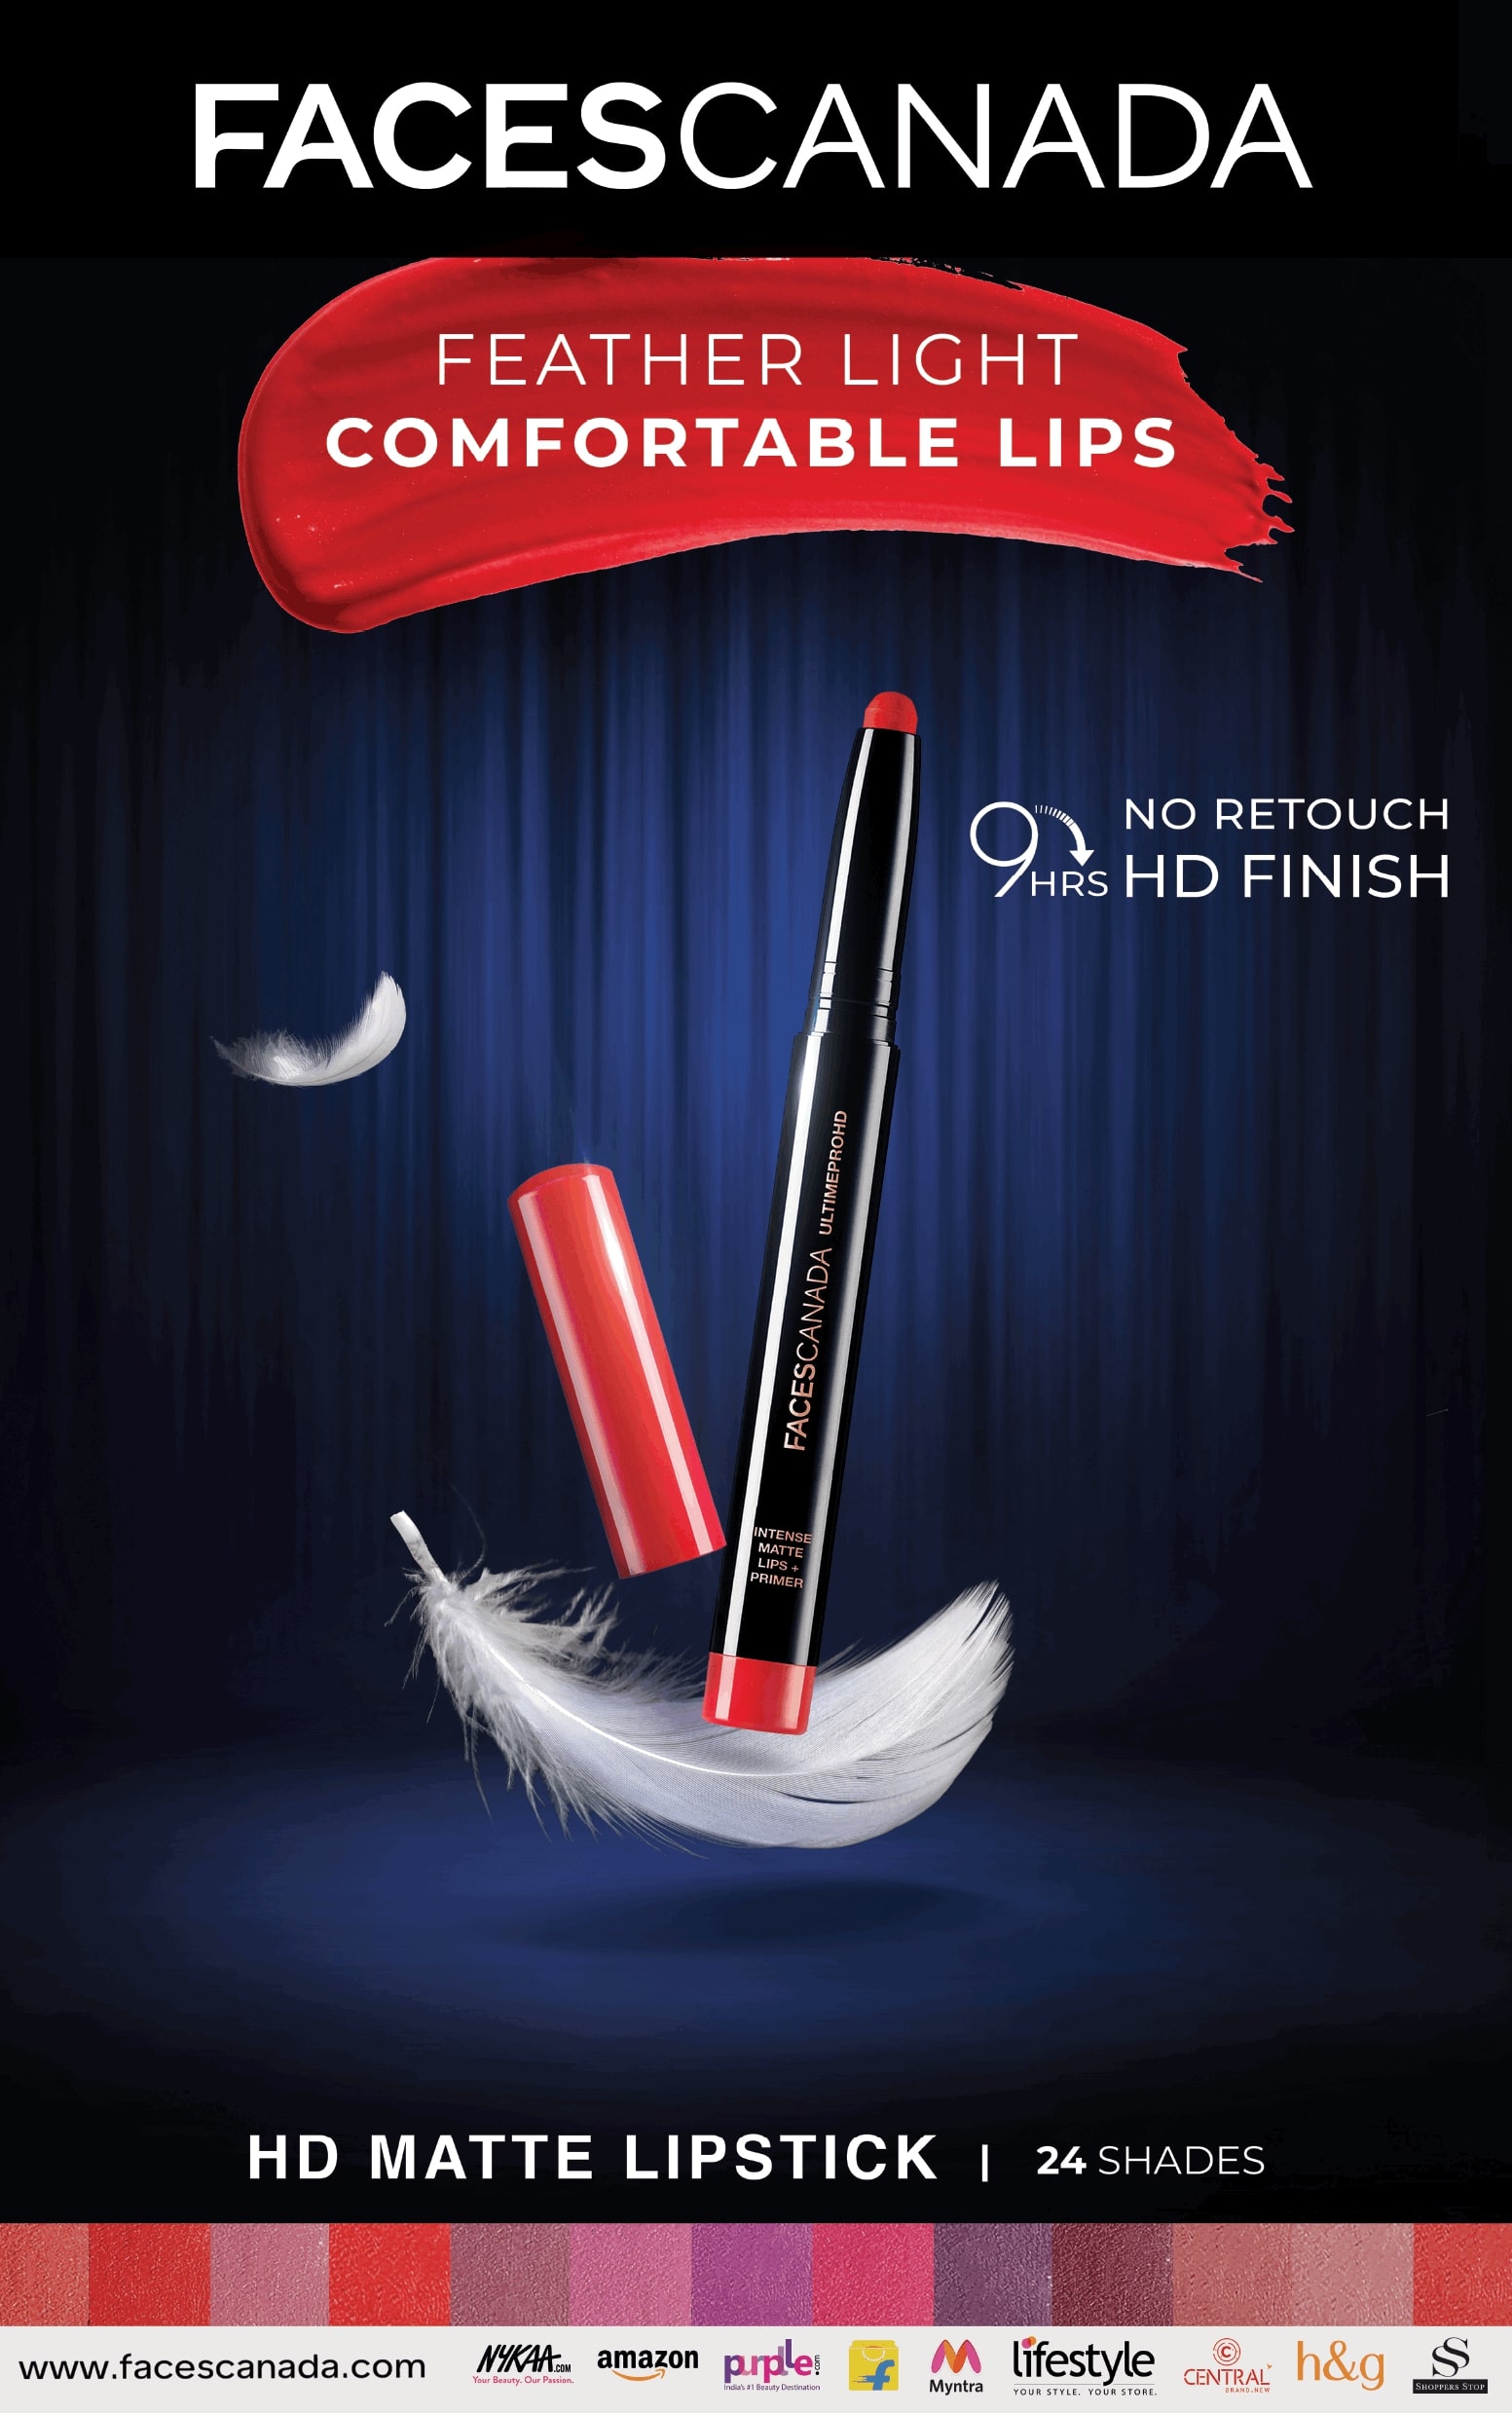 facescanada-feather-light-comfortable-lips-ad-bombay-times-30-03-2021